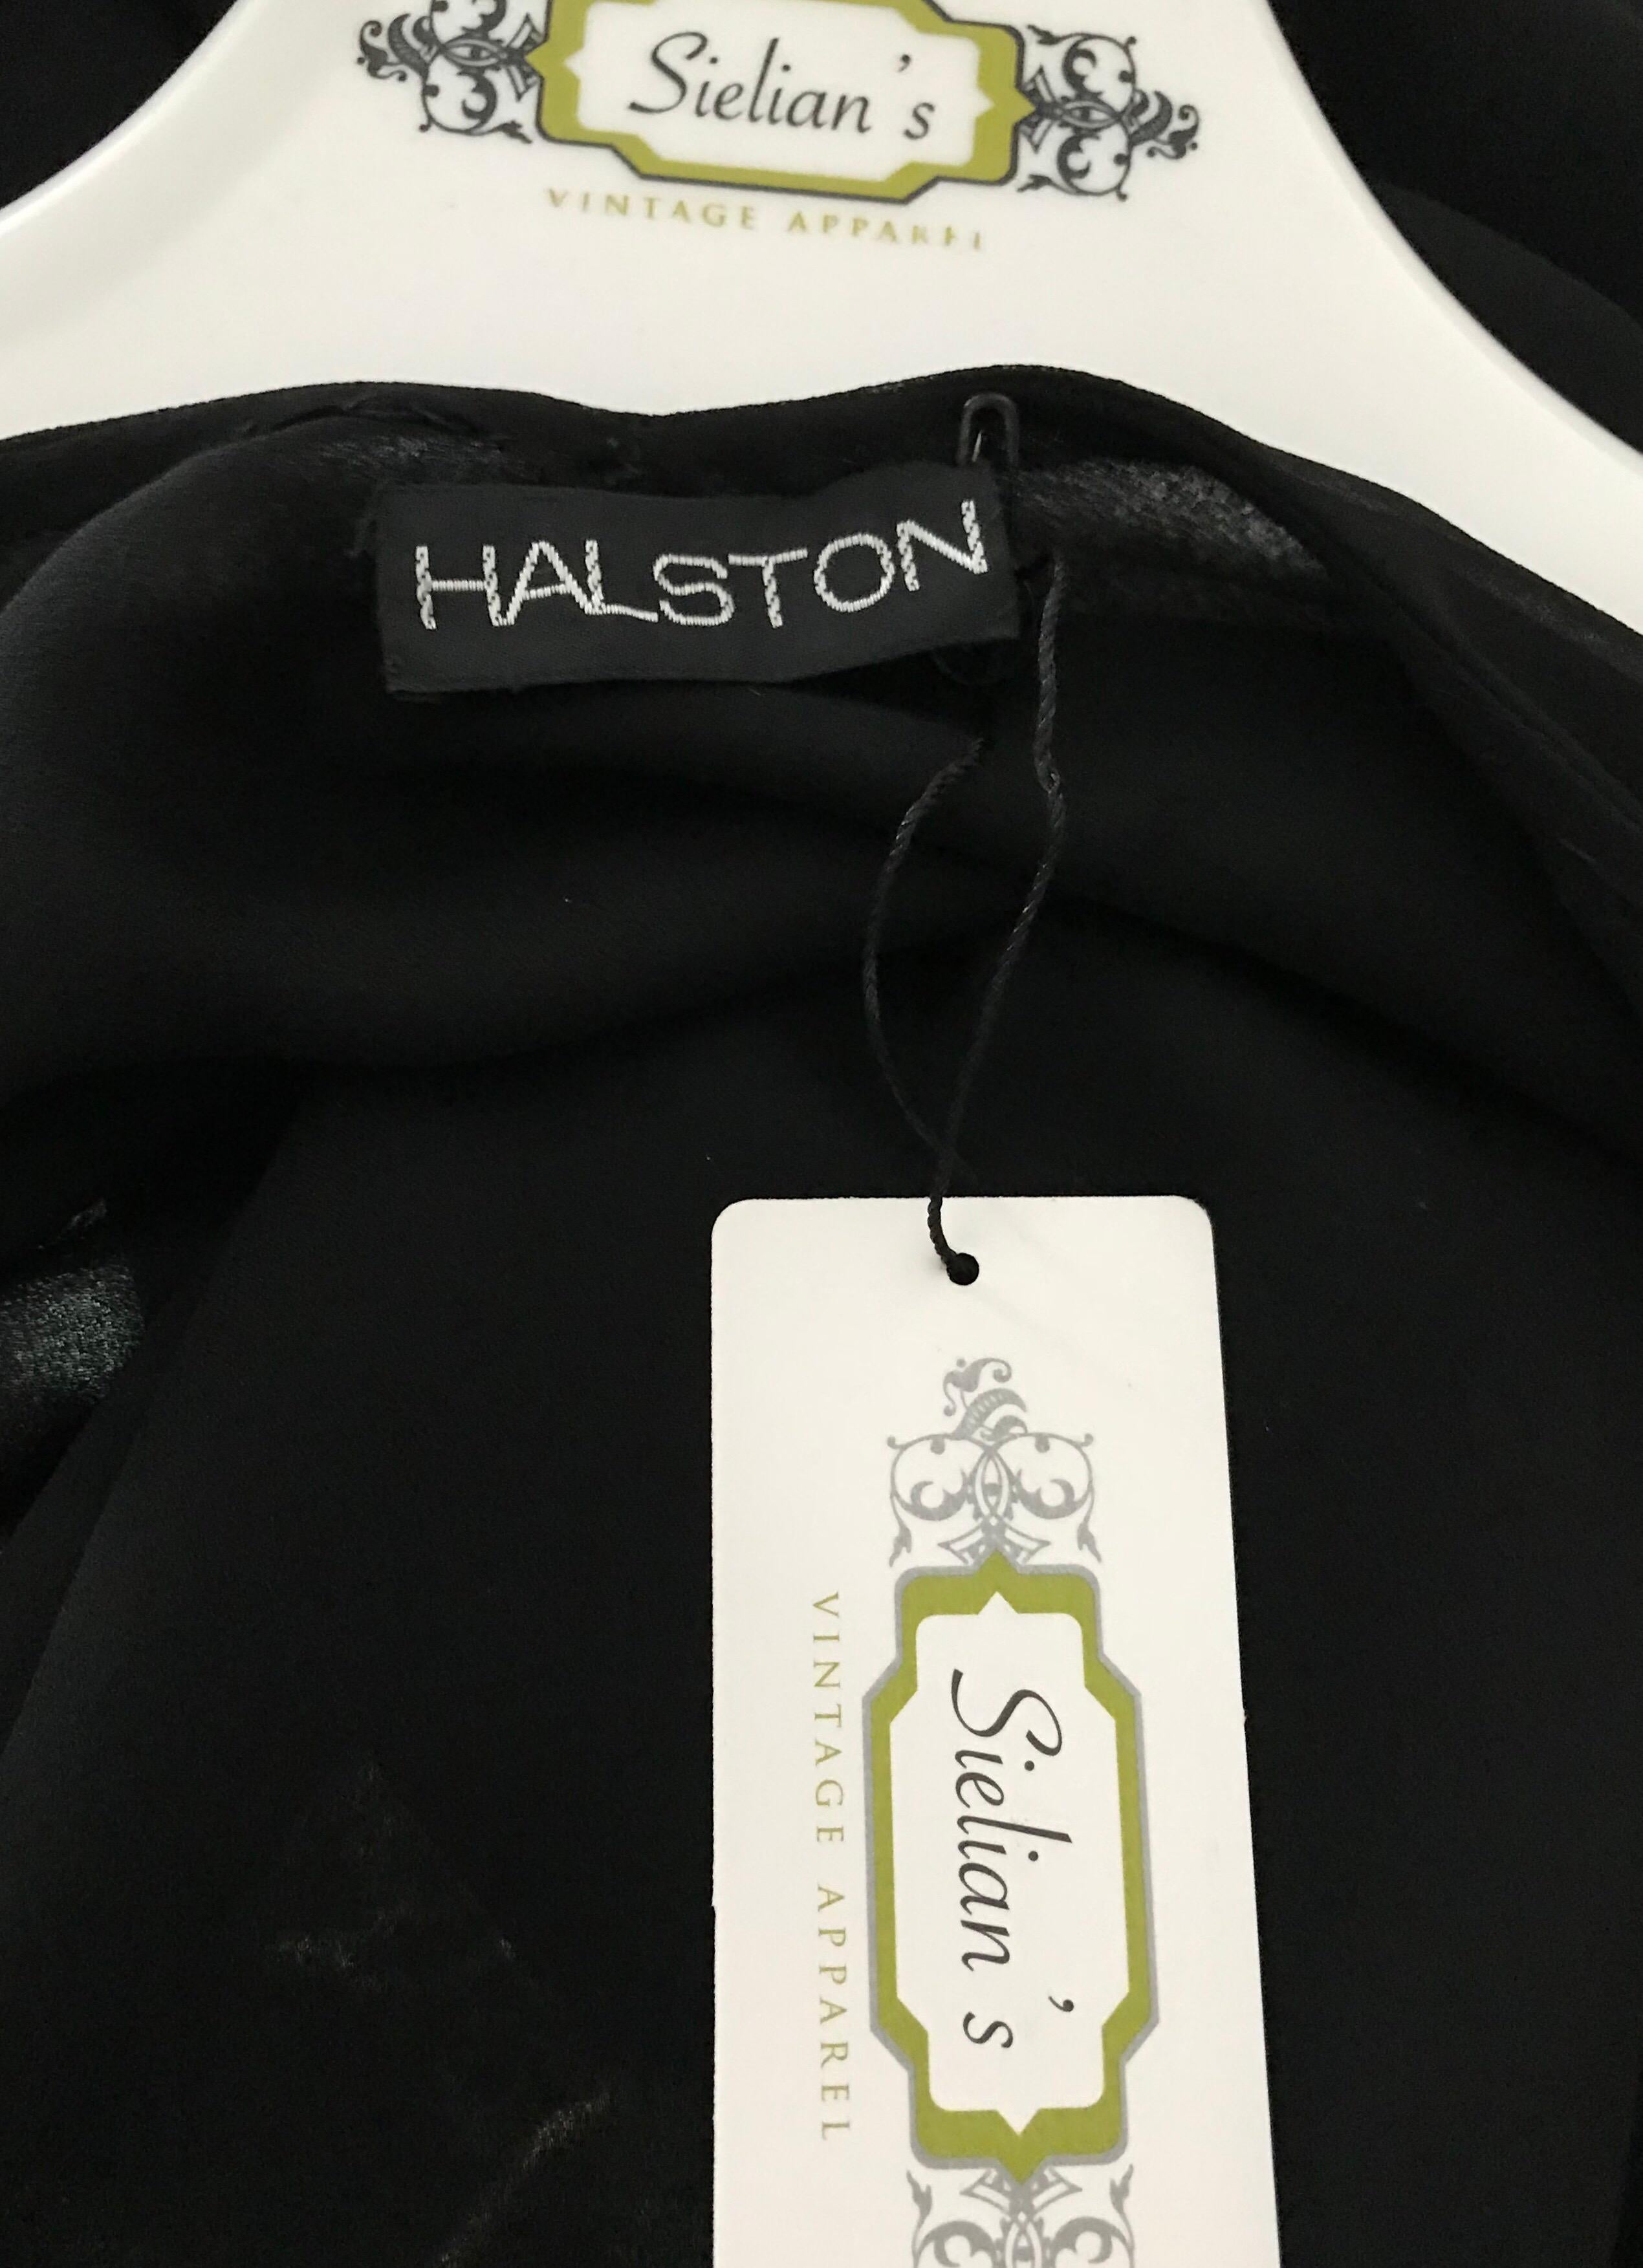 Elegant classic vintage Halston black silk chiffon bias cut slip dress with long sleeve silk overlay  Dress comes with long sash belt.  Perfect for evening cocktail party or day time party.
Size : due to the bias cut, this Halston dress fit US size: